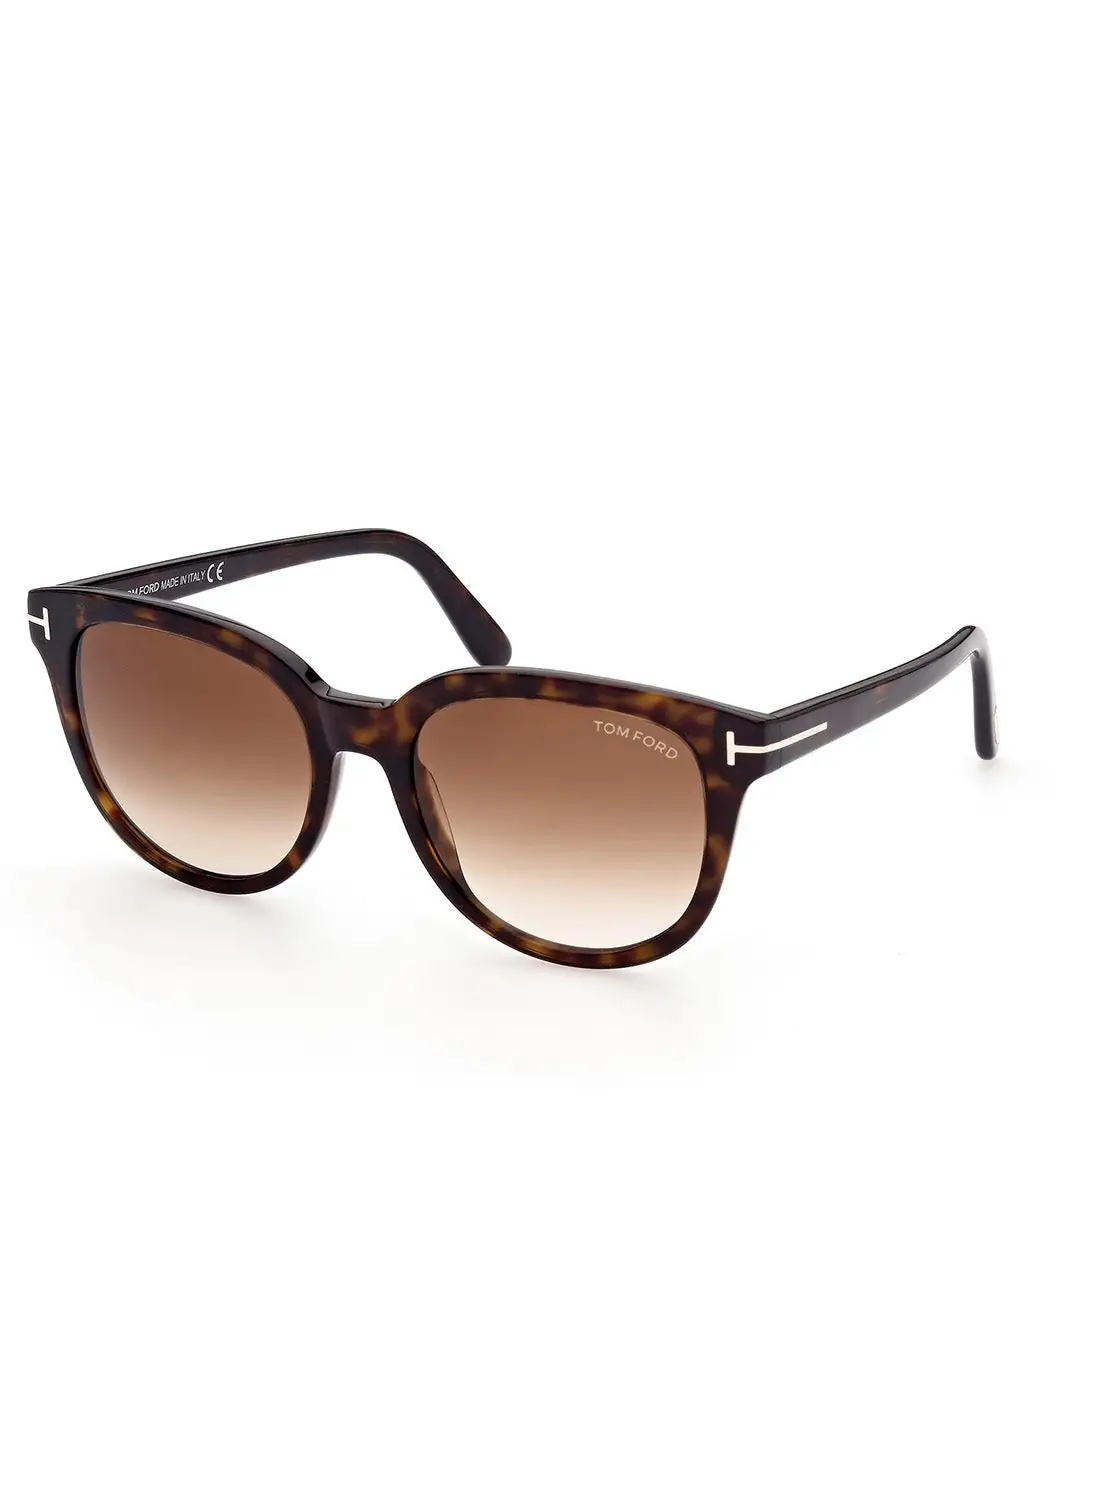 TOM FORD Women's UV Protection Round Sunglasses - FT091452F54 - Lens Size: 54 Mm